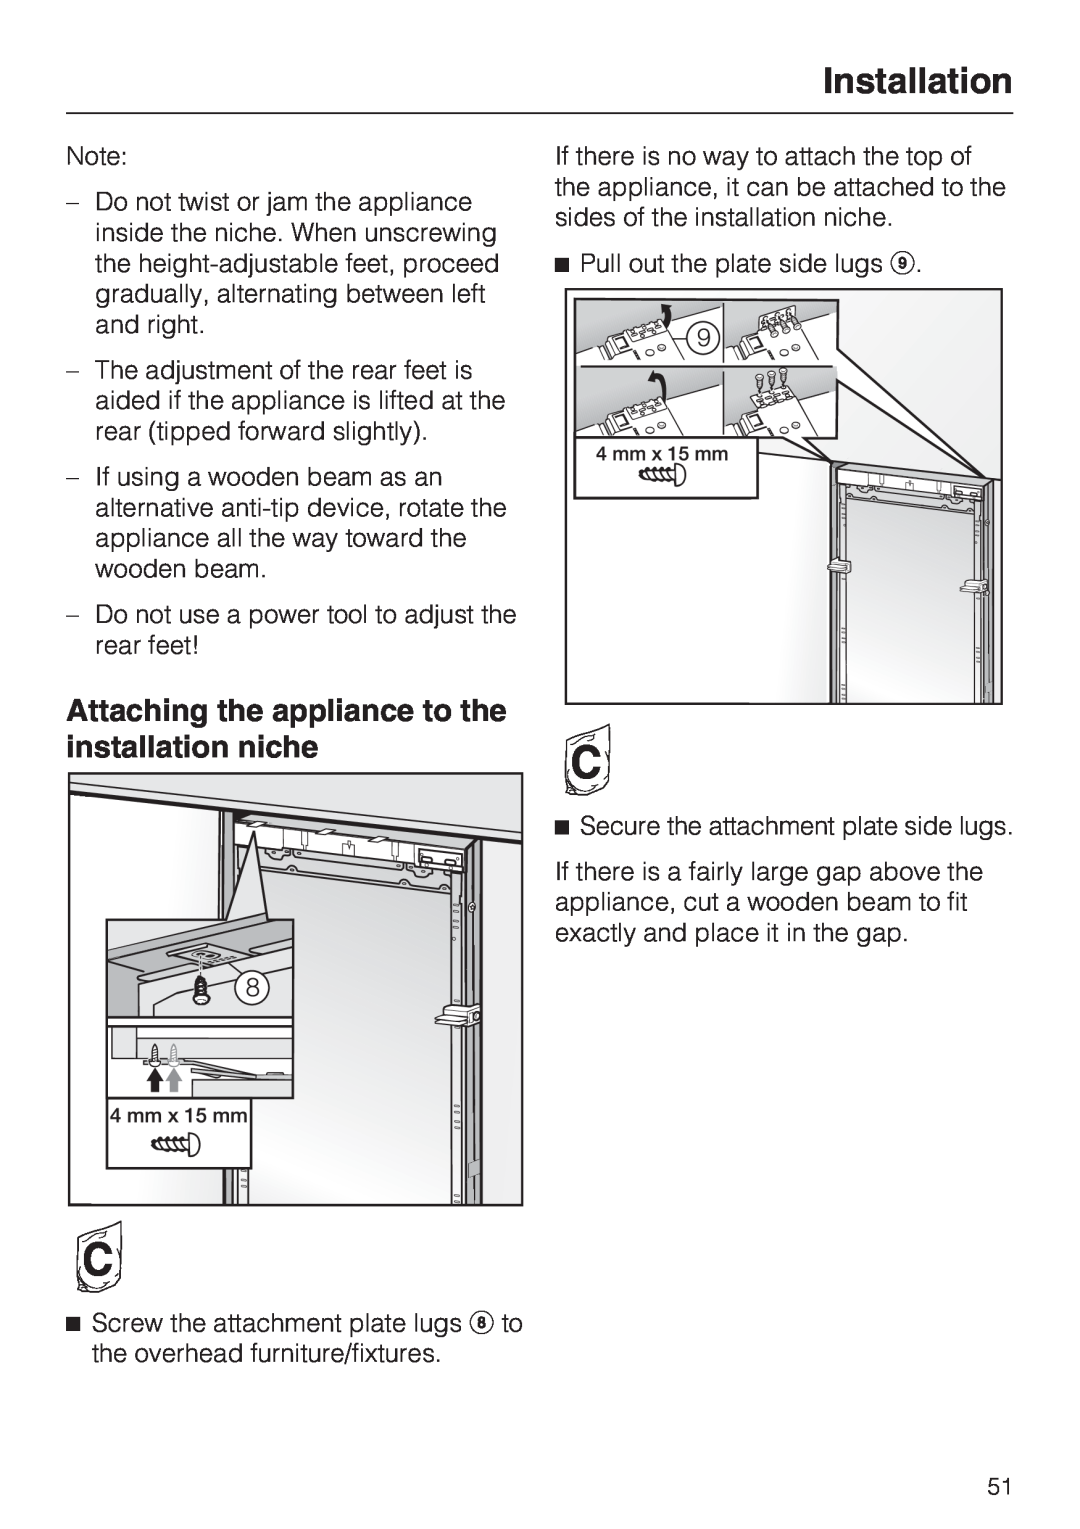 Miele KWT1601VI, KWT1611VI installation instructions Attaching the appliance to the installation niche, Installation 